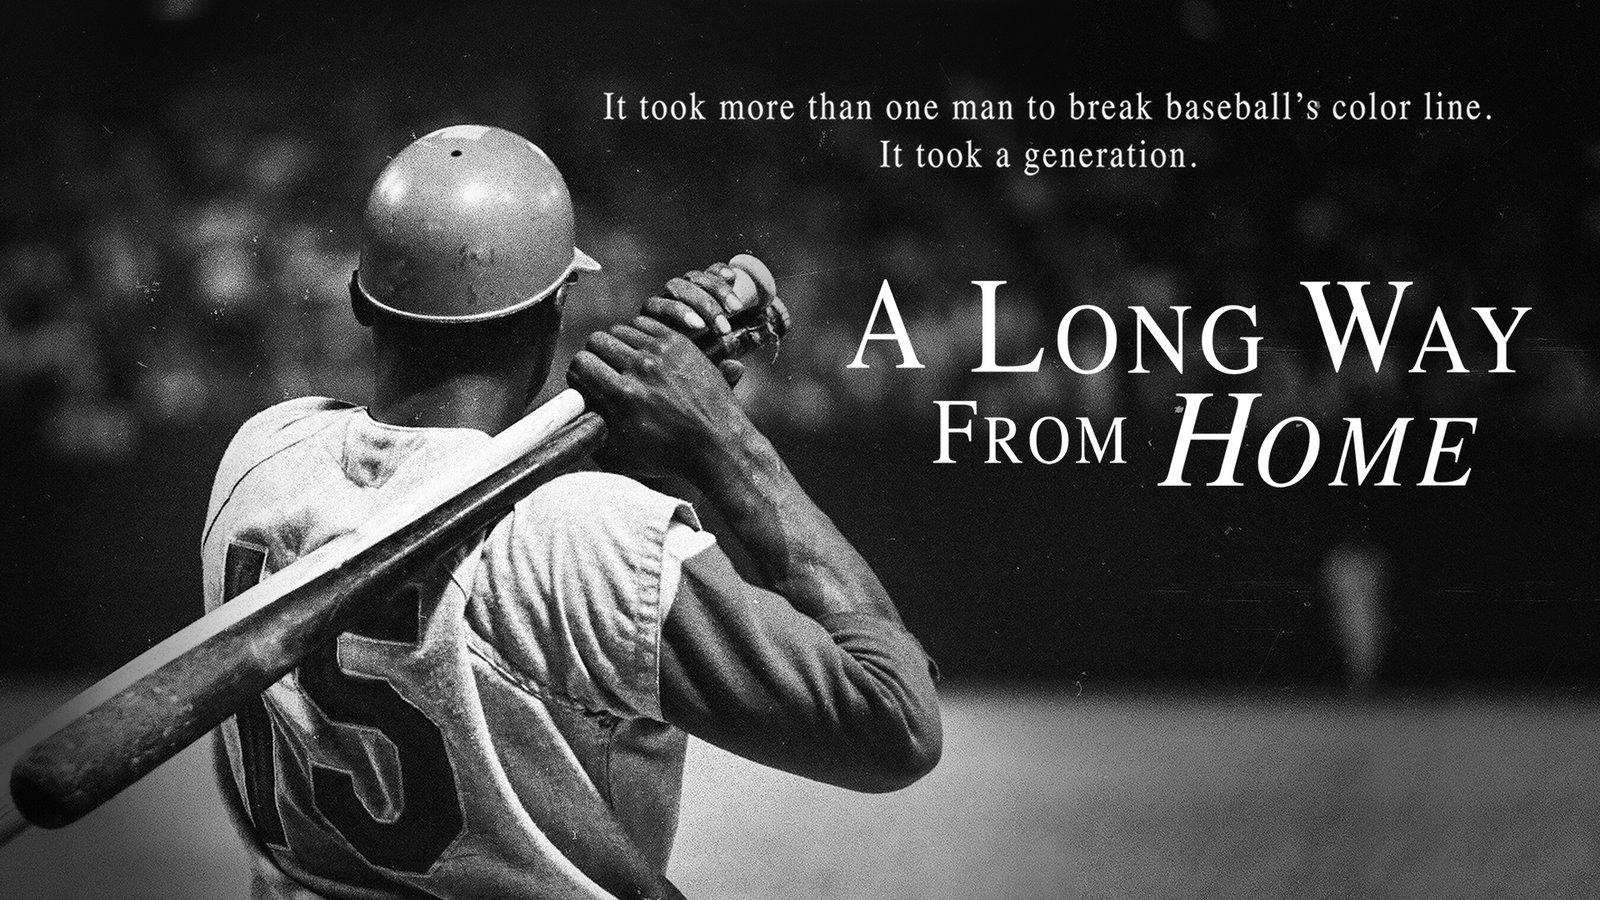 A Long Way From Home - The Untold Story of Baseball's Desegregation